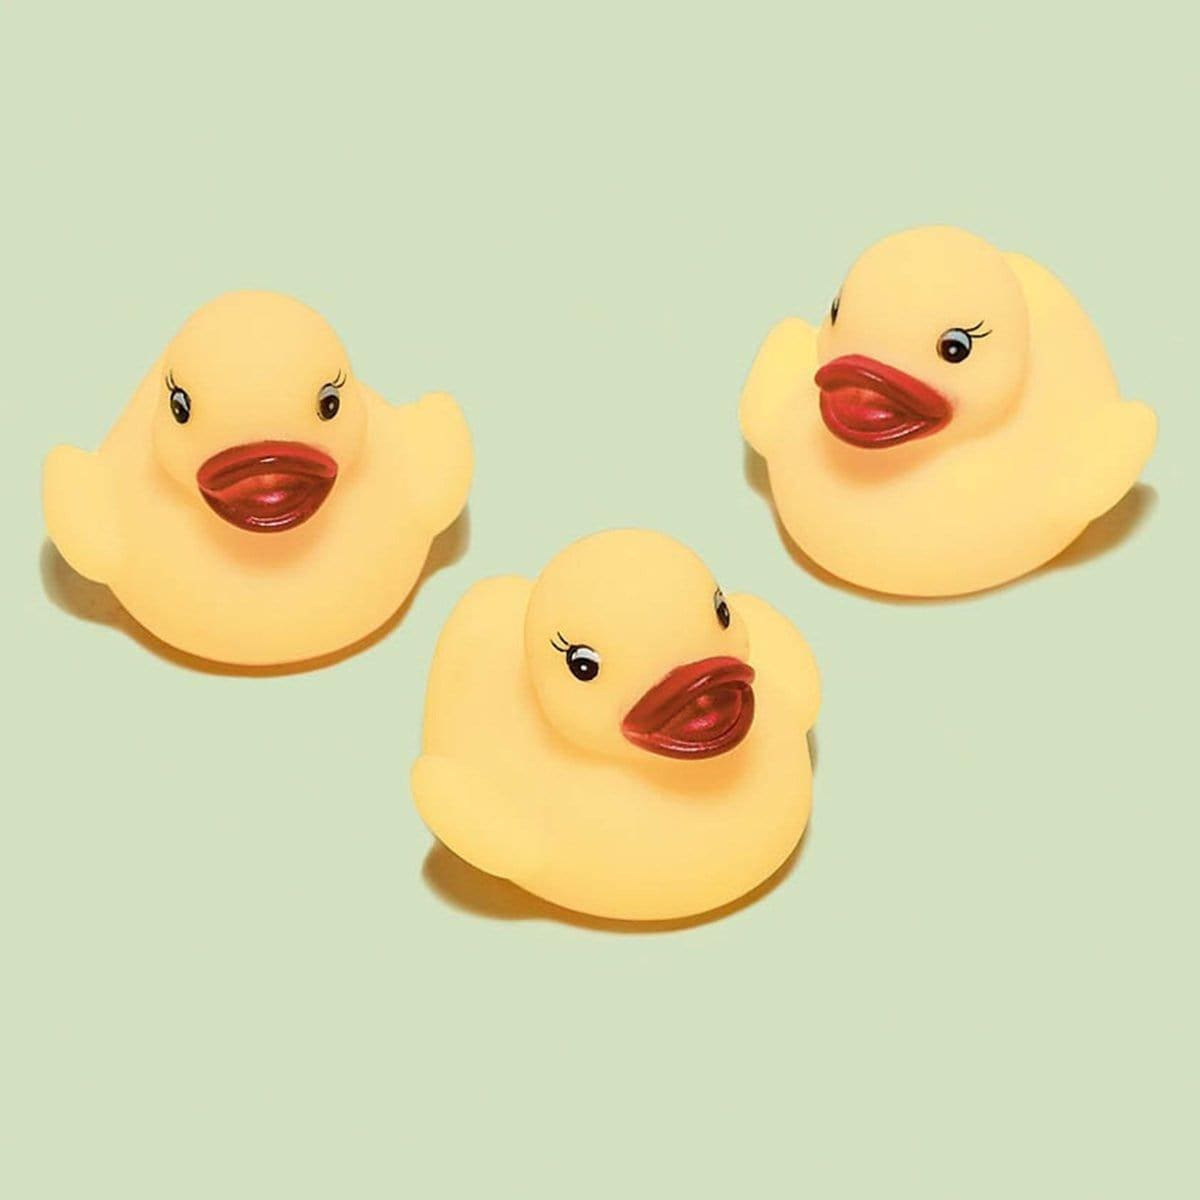 Buy Baby Shower Rubber duckies, 3 per package sold at Party Expert